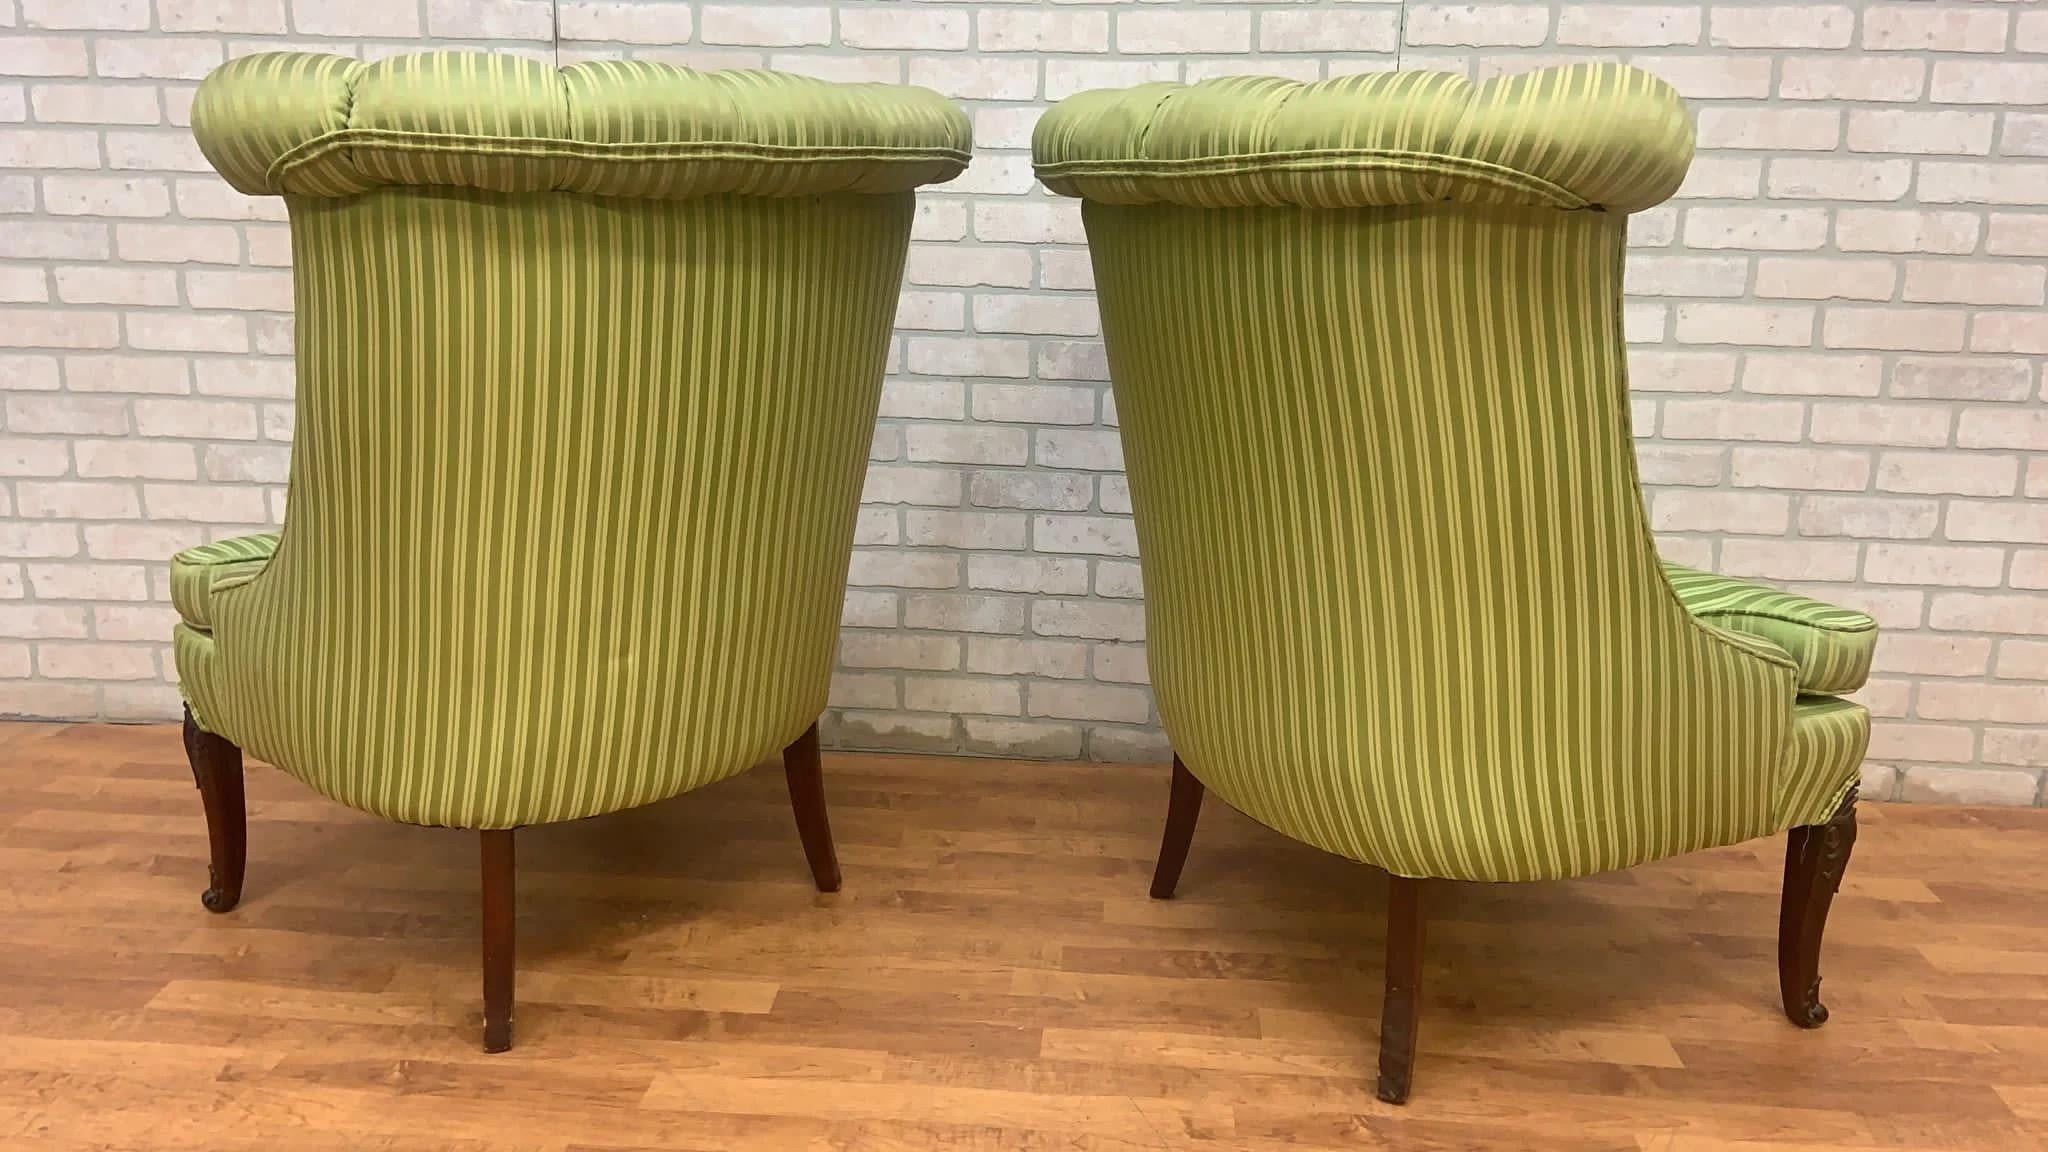 British Vintage Queen Anne Style Rolled Back Tufted Wingback Chairs - Pair For Sale